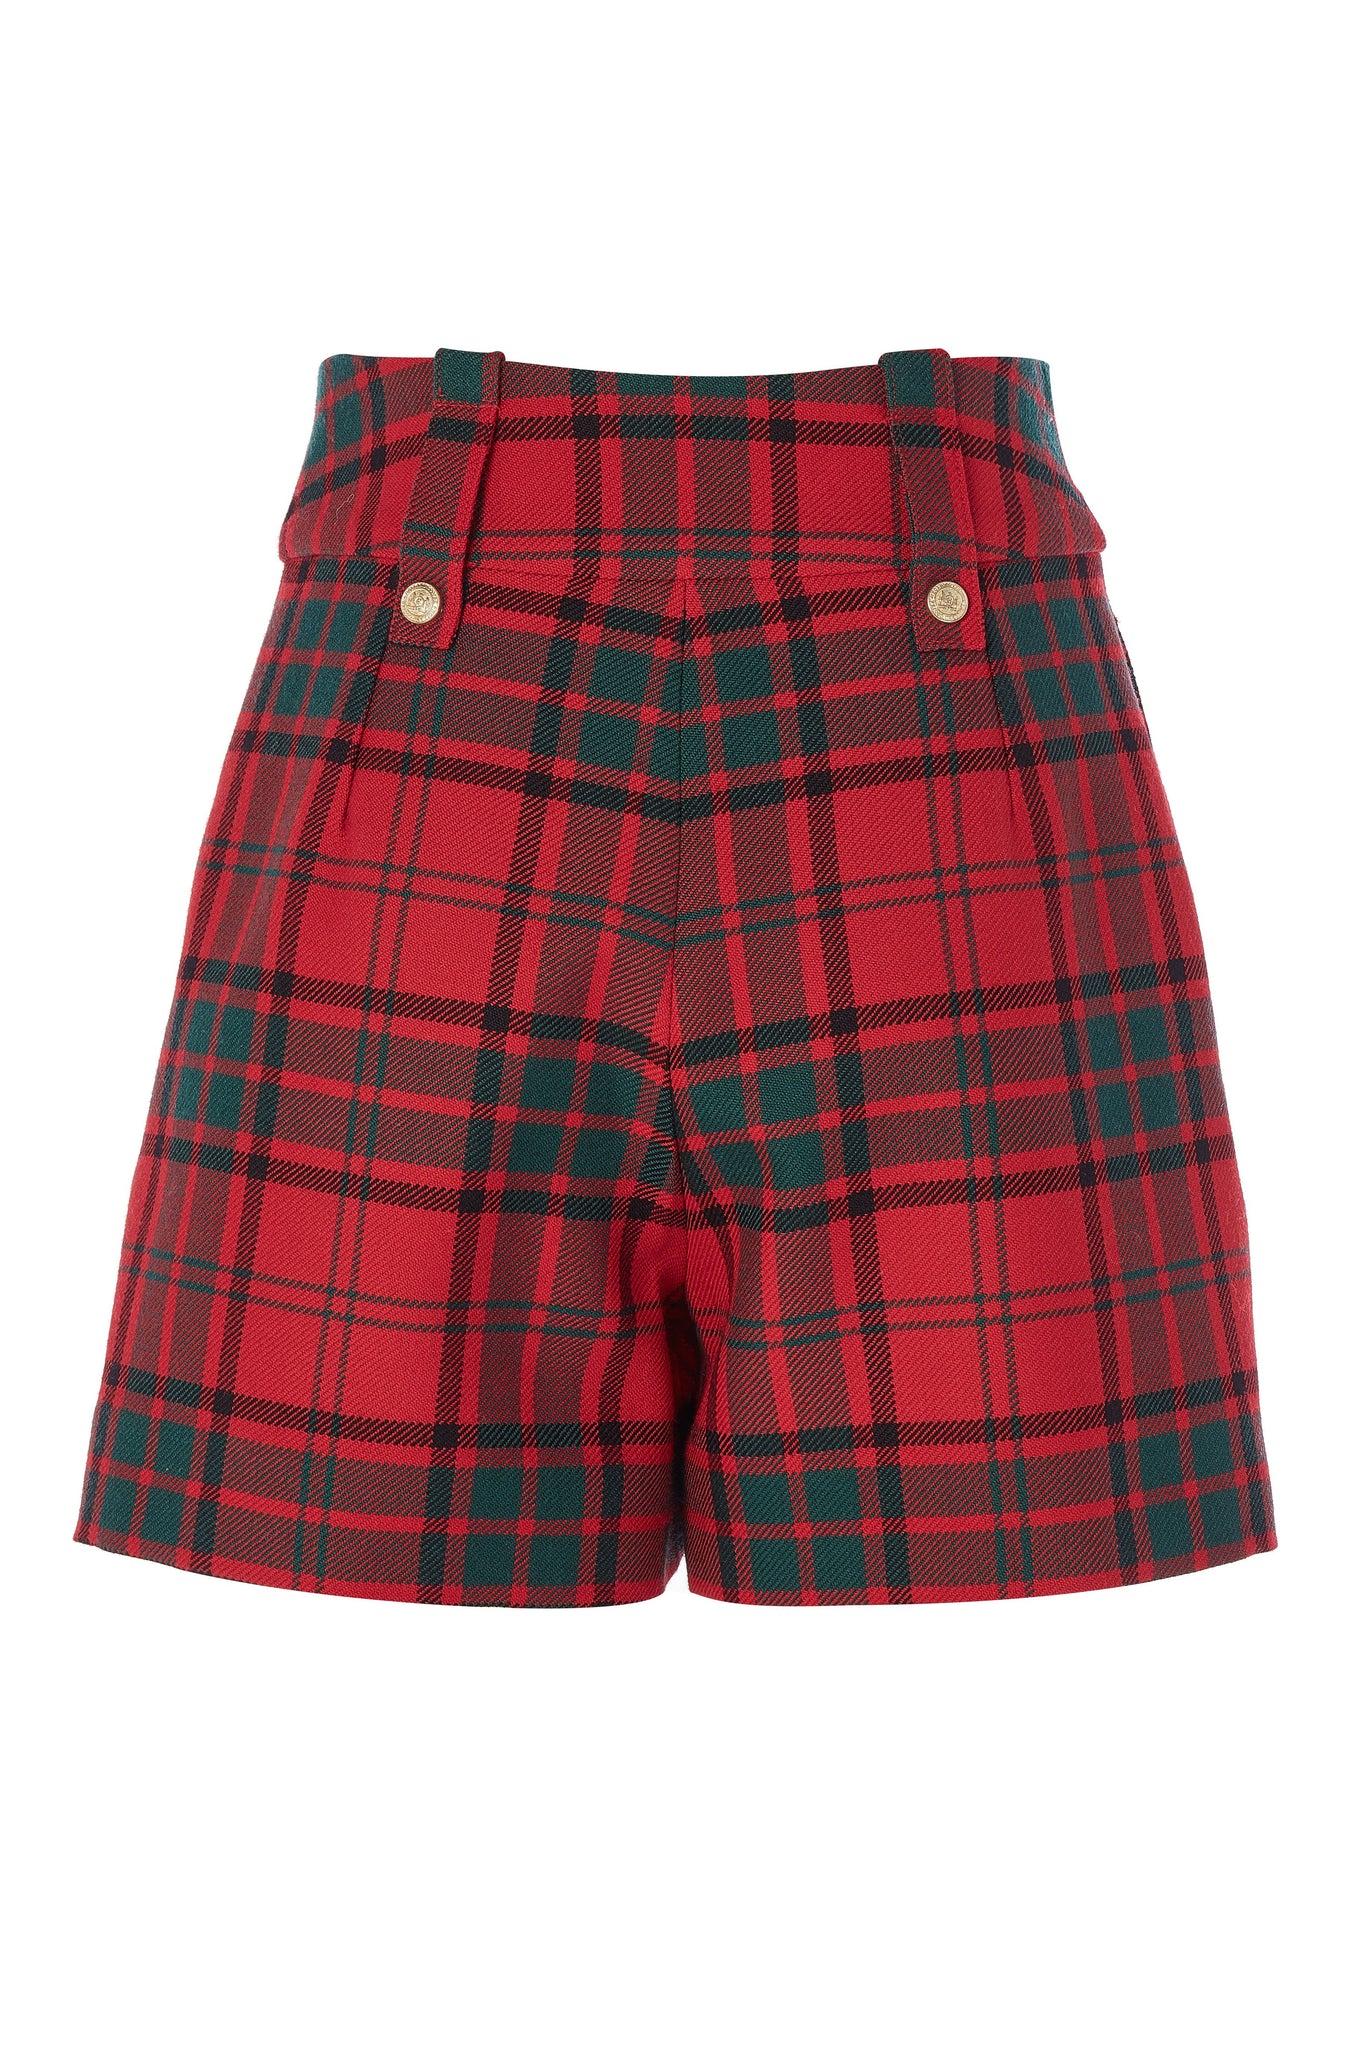 back of womens red and black tartan high rise tailored shorts with two single knife pleats and centre front zip fly fastening with twin branded gold stud buttons and side hip pockets with branded rivet detailing at top and bottom of pockets